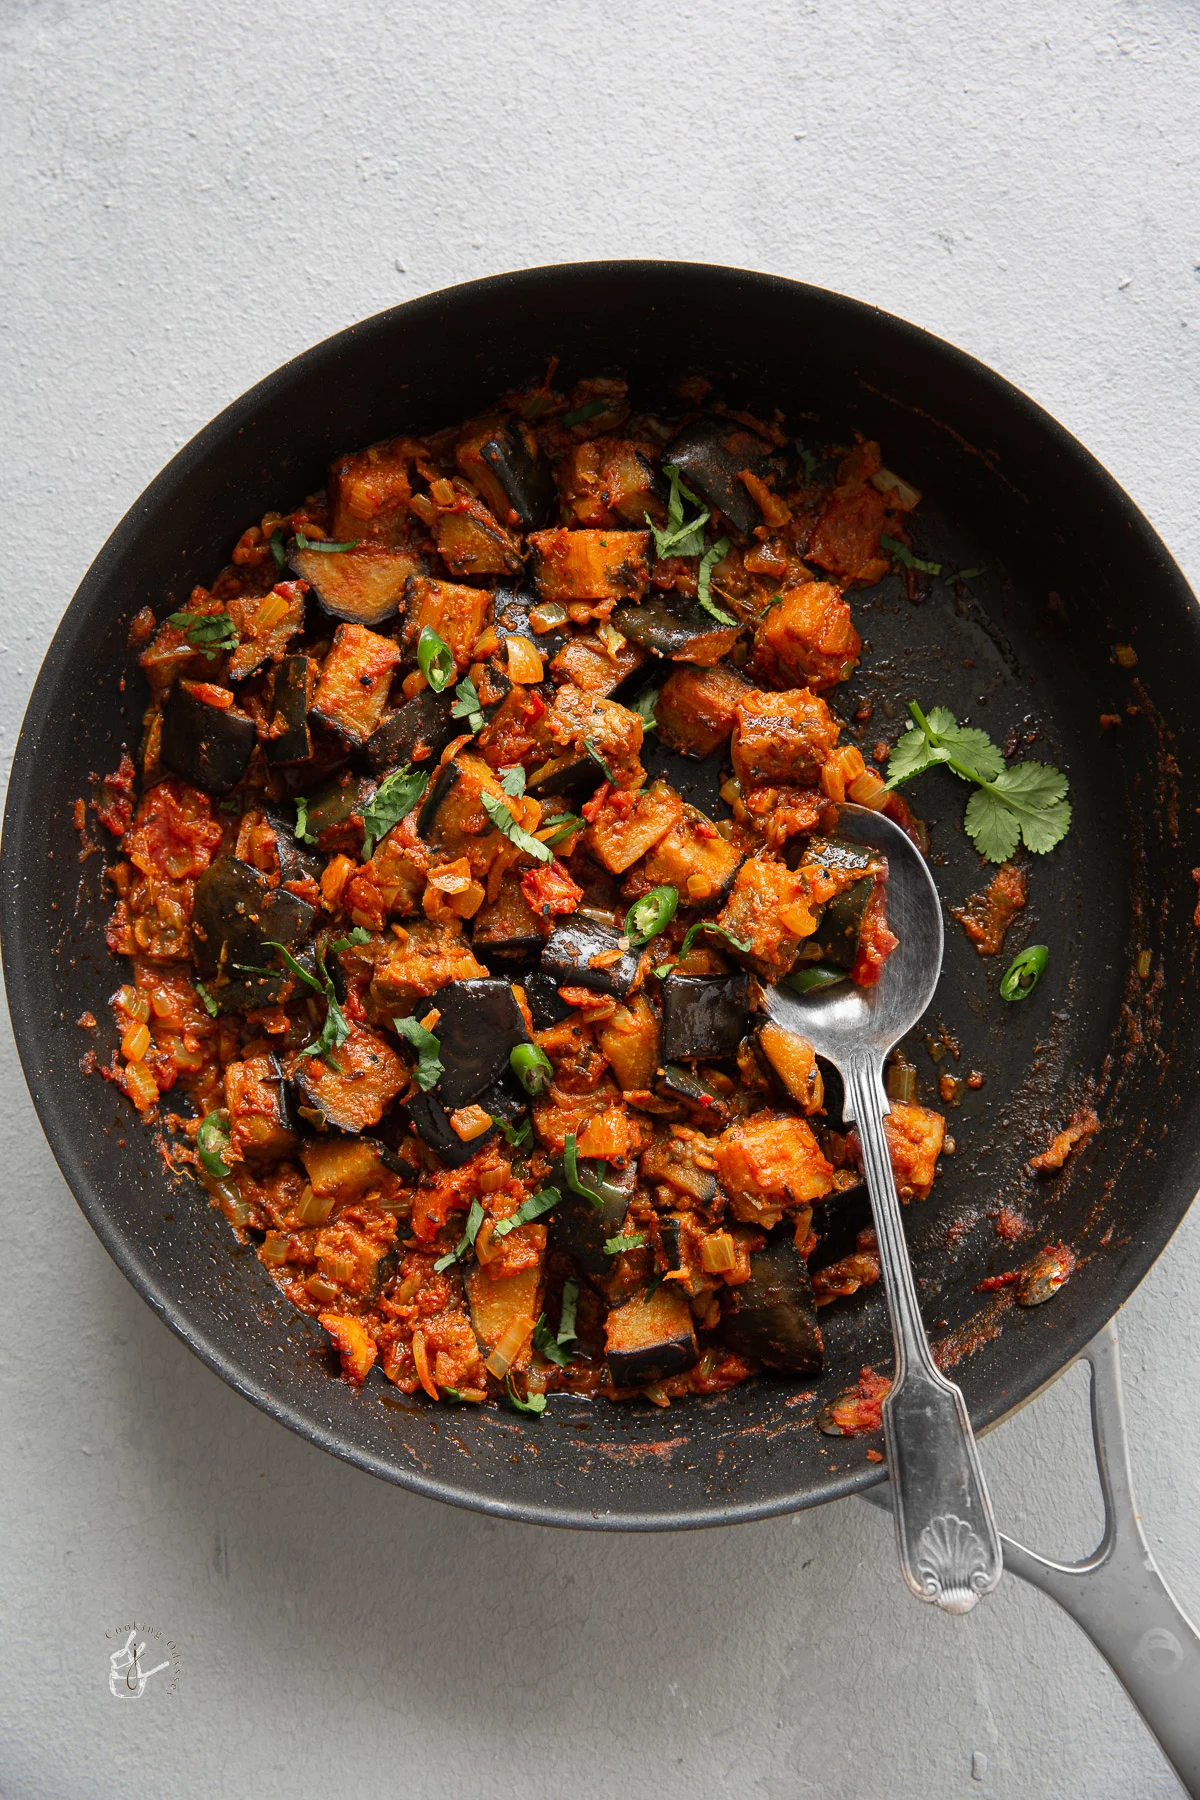 Brinjal bhaji is a quick 20 minute recipe made with aubergine, fresh tomatoes and onions